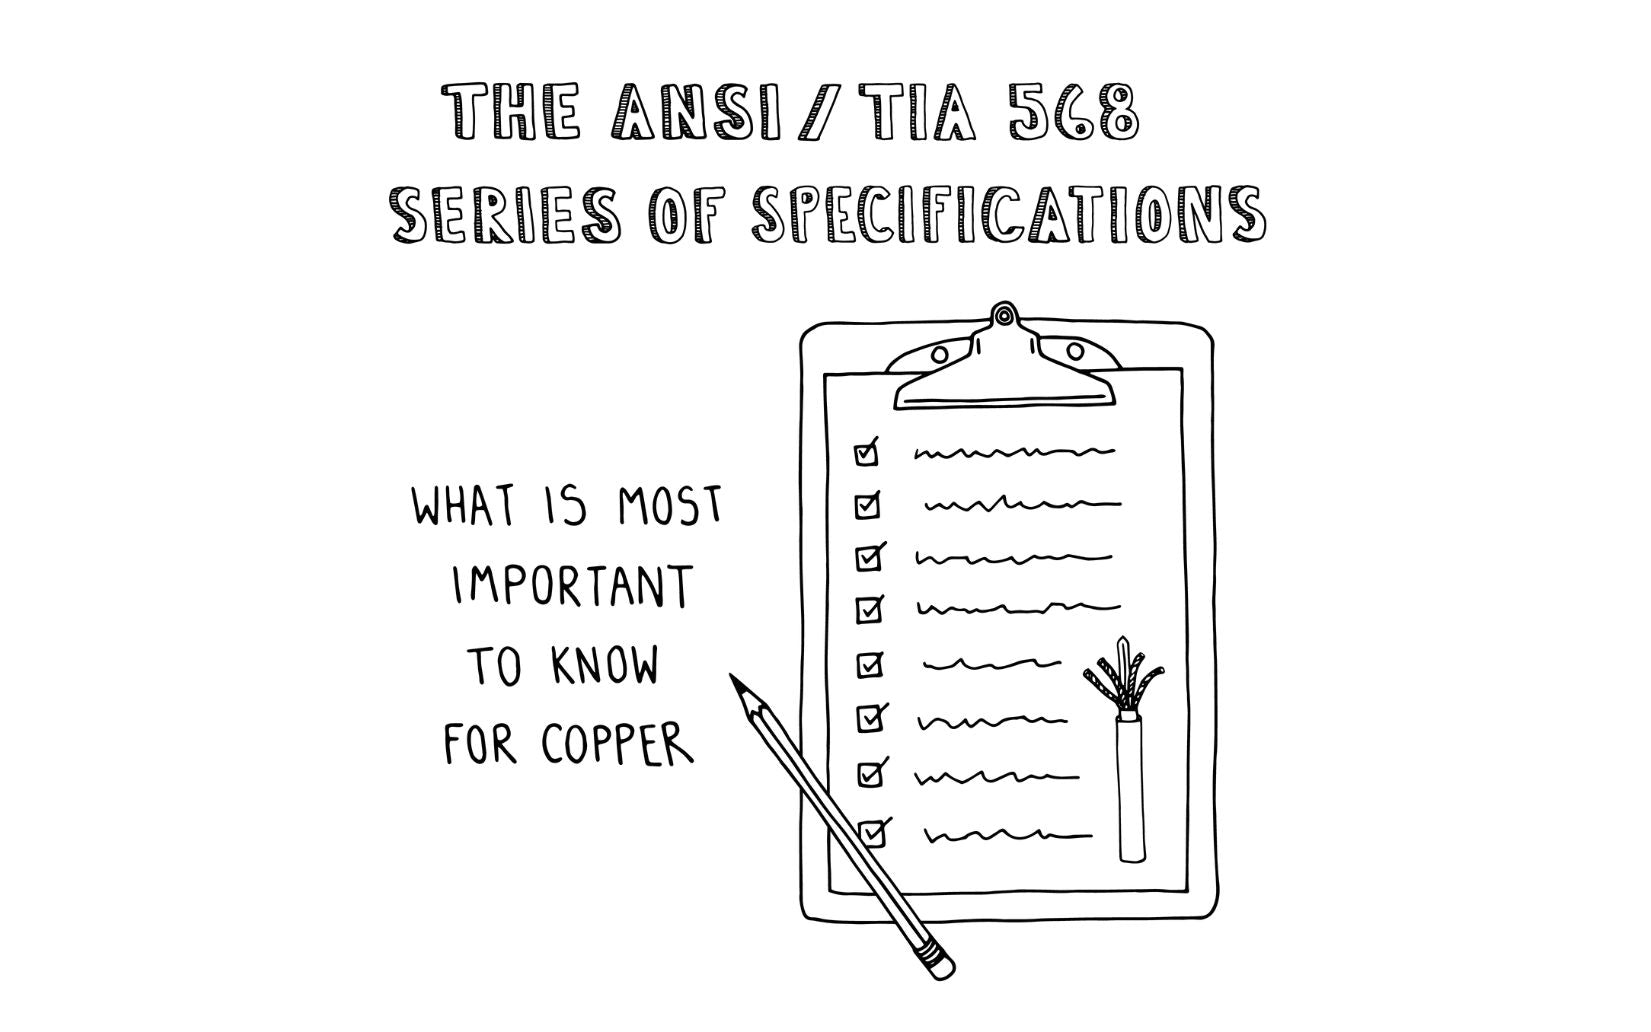 The ANSI/TIA 568 Series of Specifications: What is Most important to Know for Copper